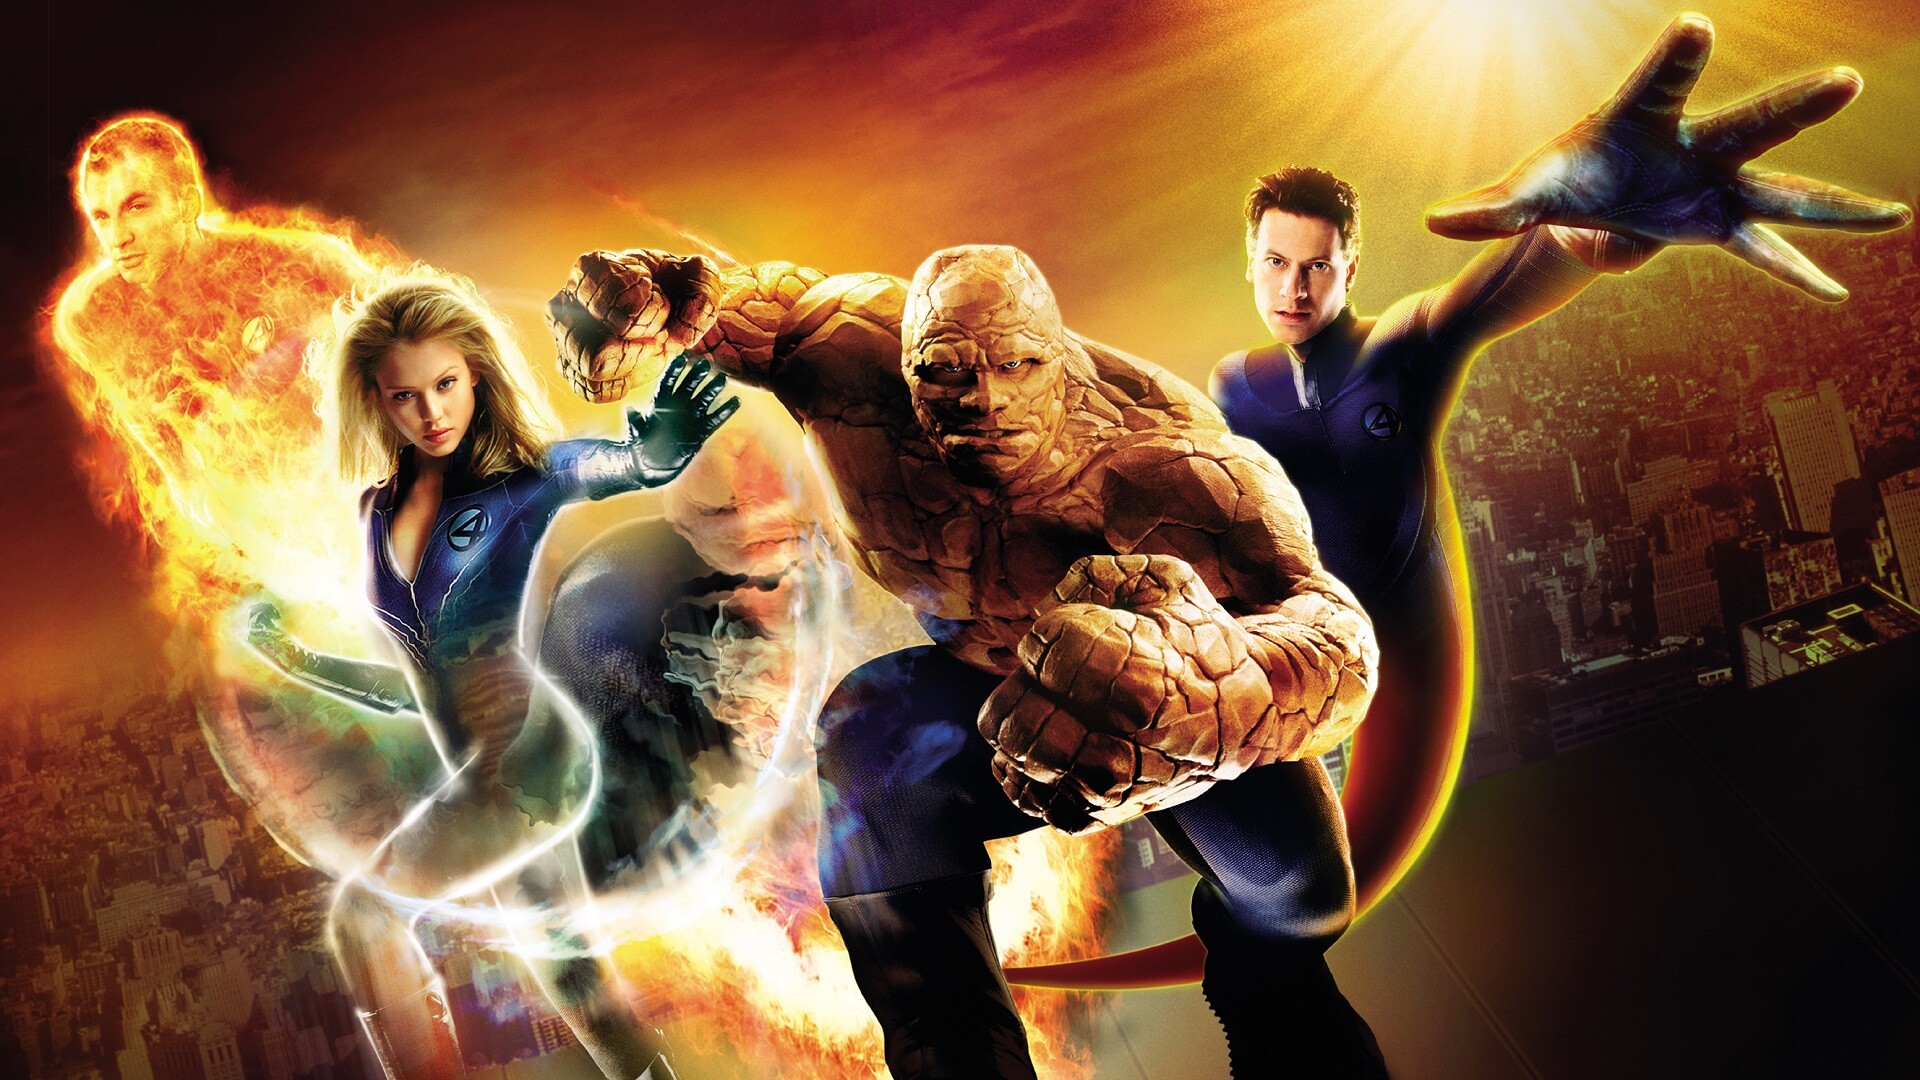 Fantastic 4: FF, Known formally as Reed Richards, Susan Storm, Ben Grimm and Johnny Storm. 1920x1080 Full HD Background.